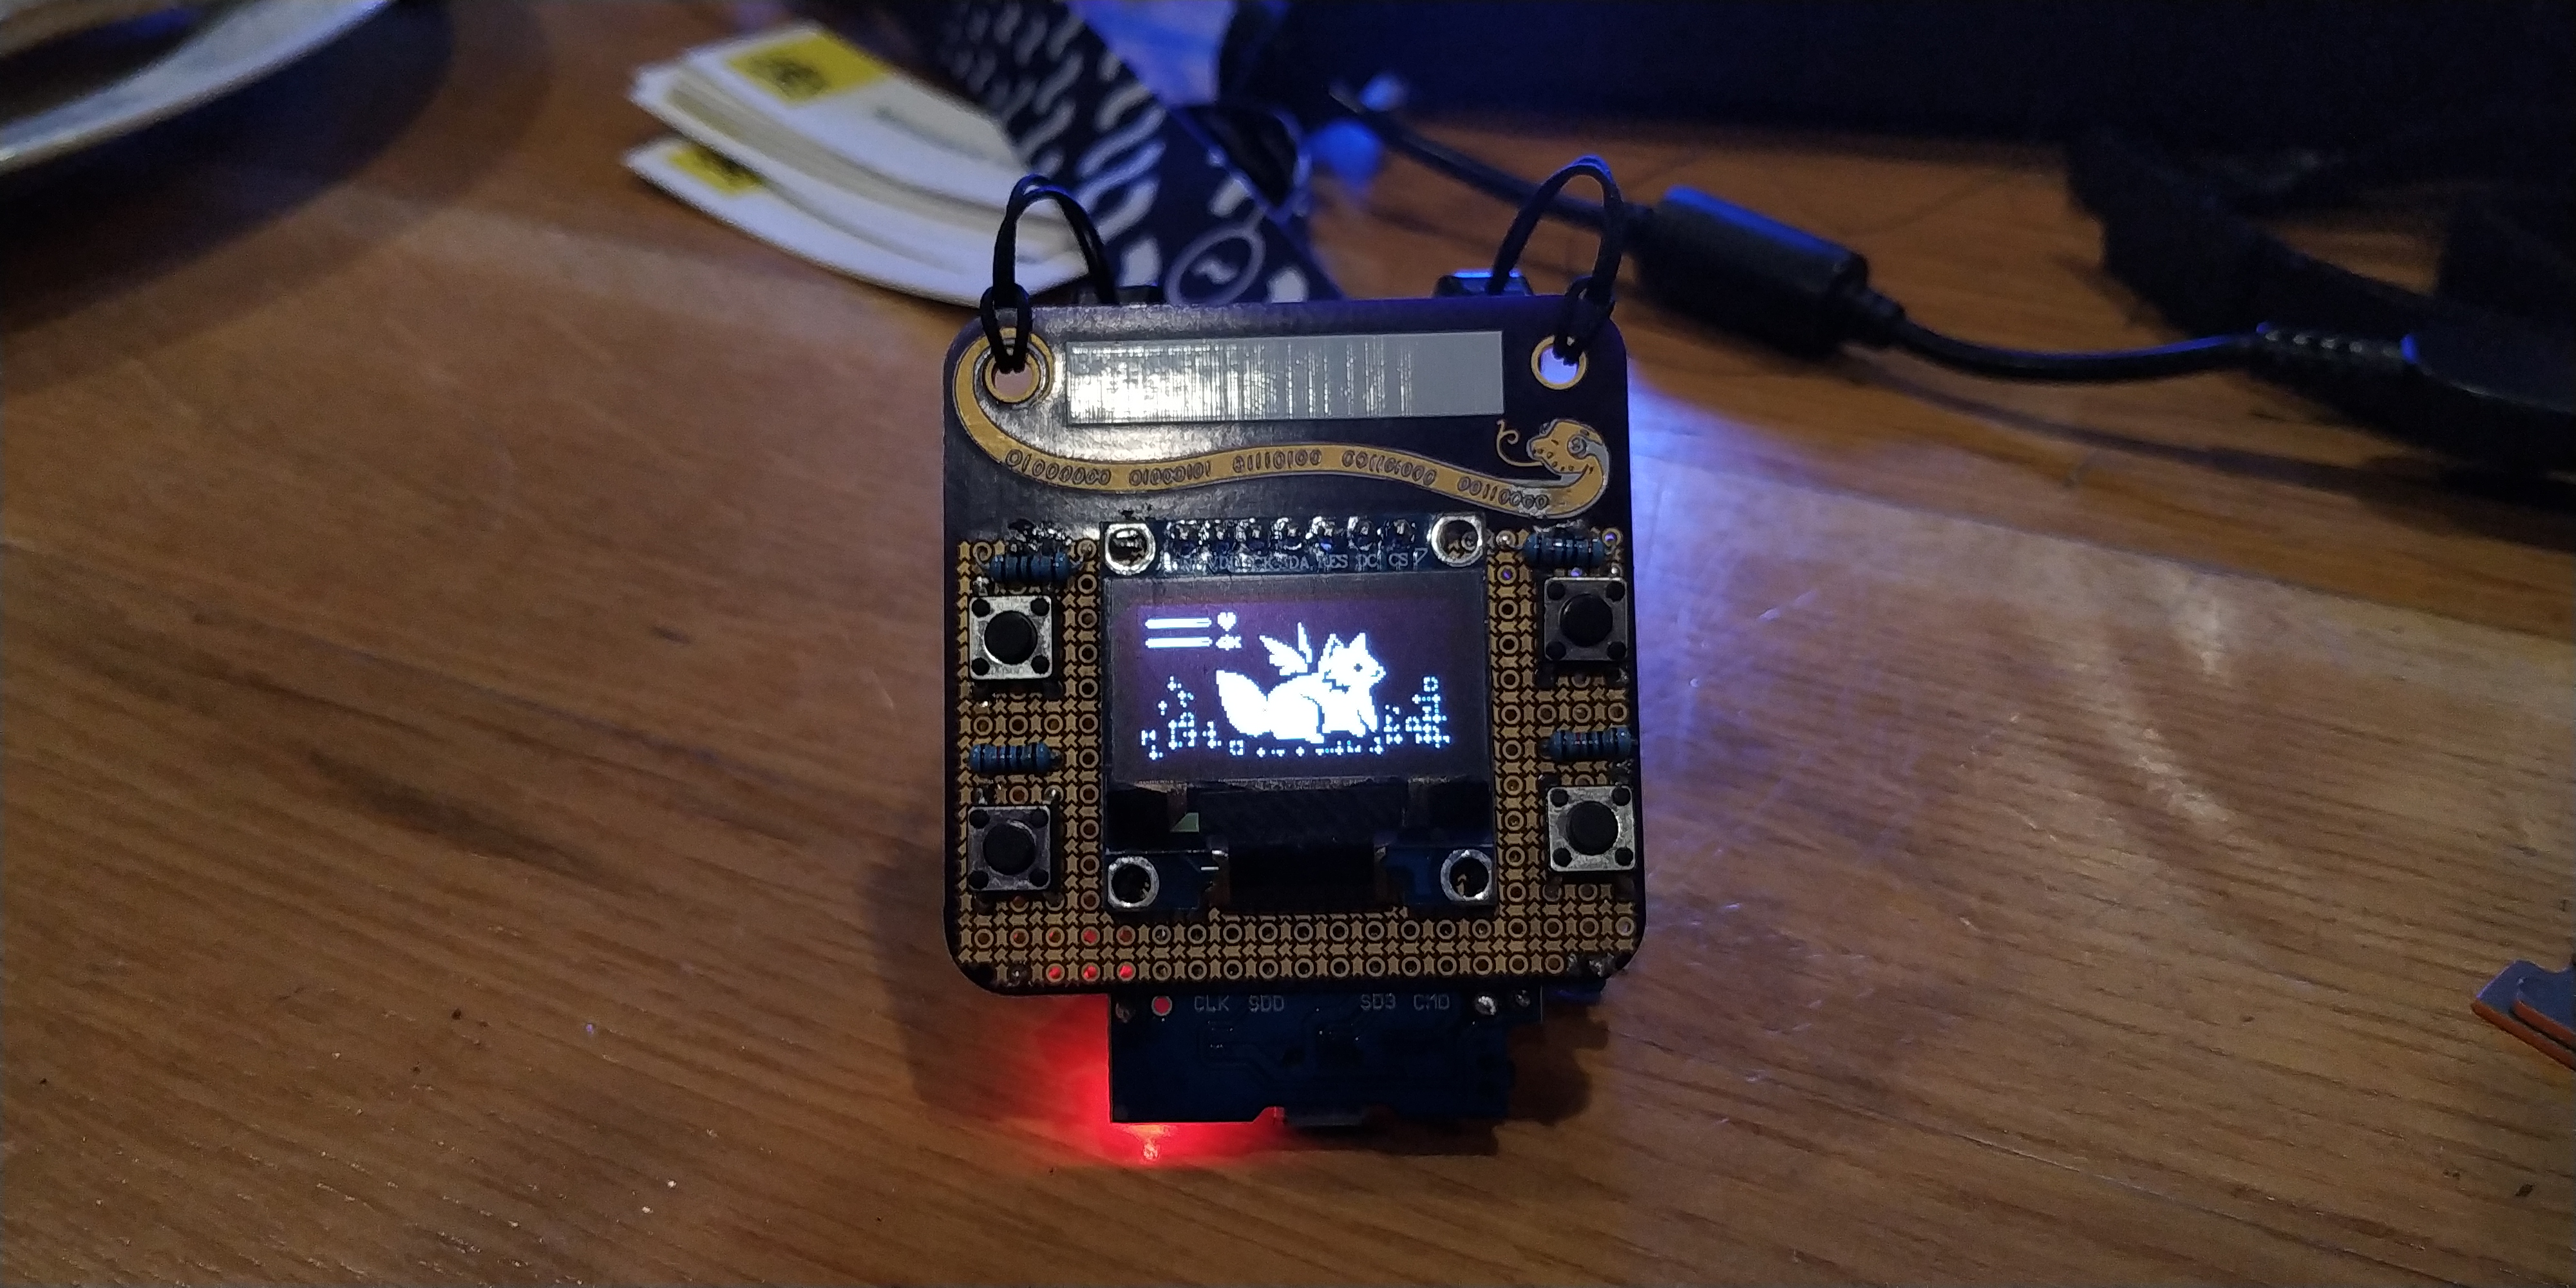 The tamafoxi prototype, on an SMD protoboard with a screen that shows an active fox